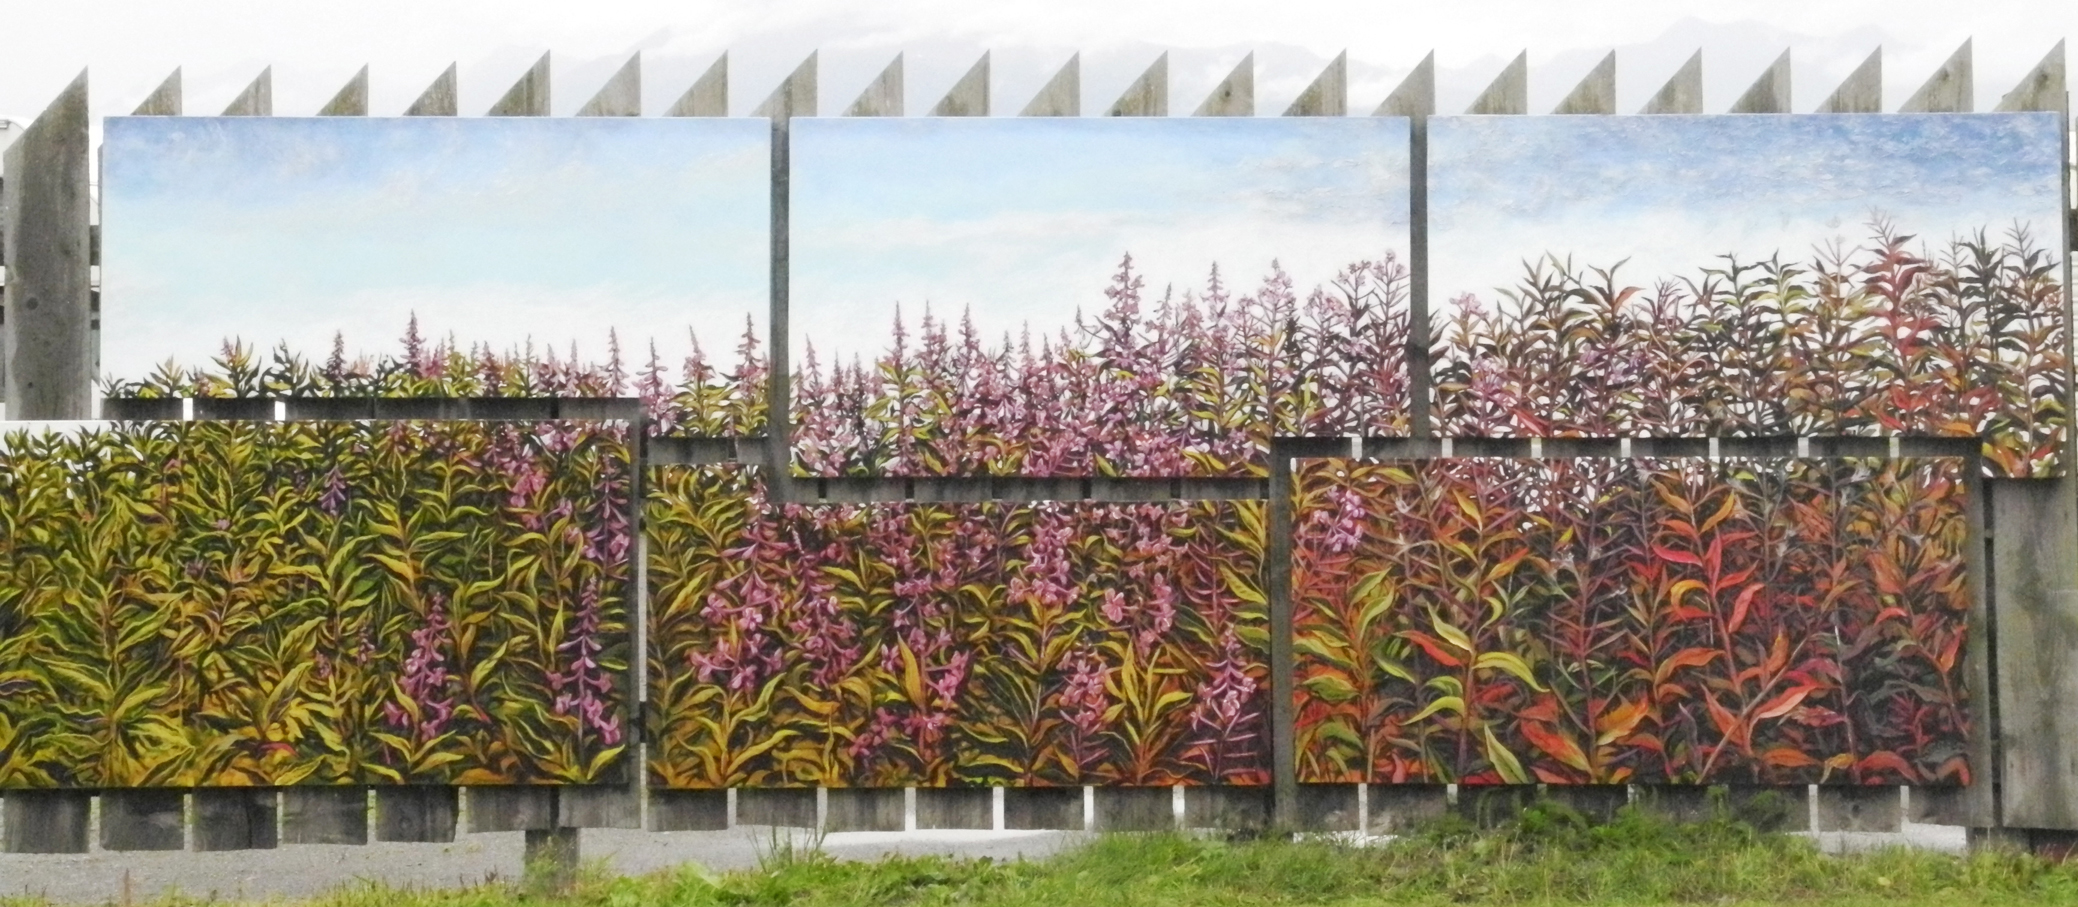 Dan Coe’s six-panel fireweed mural shows the progression of fireweed from flower to fluff over the season.-Photo by Michael Armstrong, Homer News